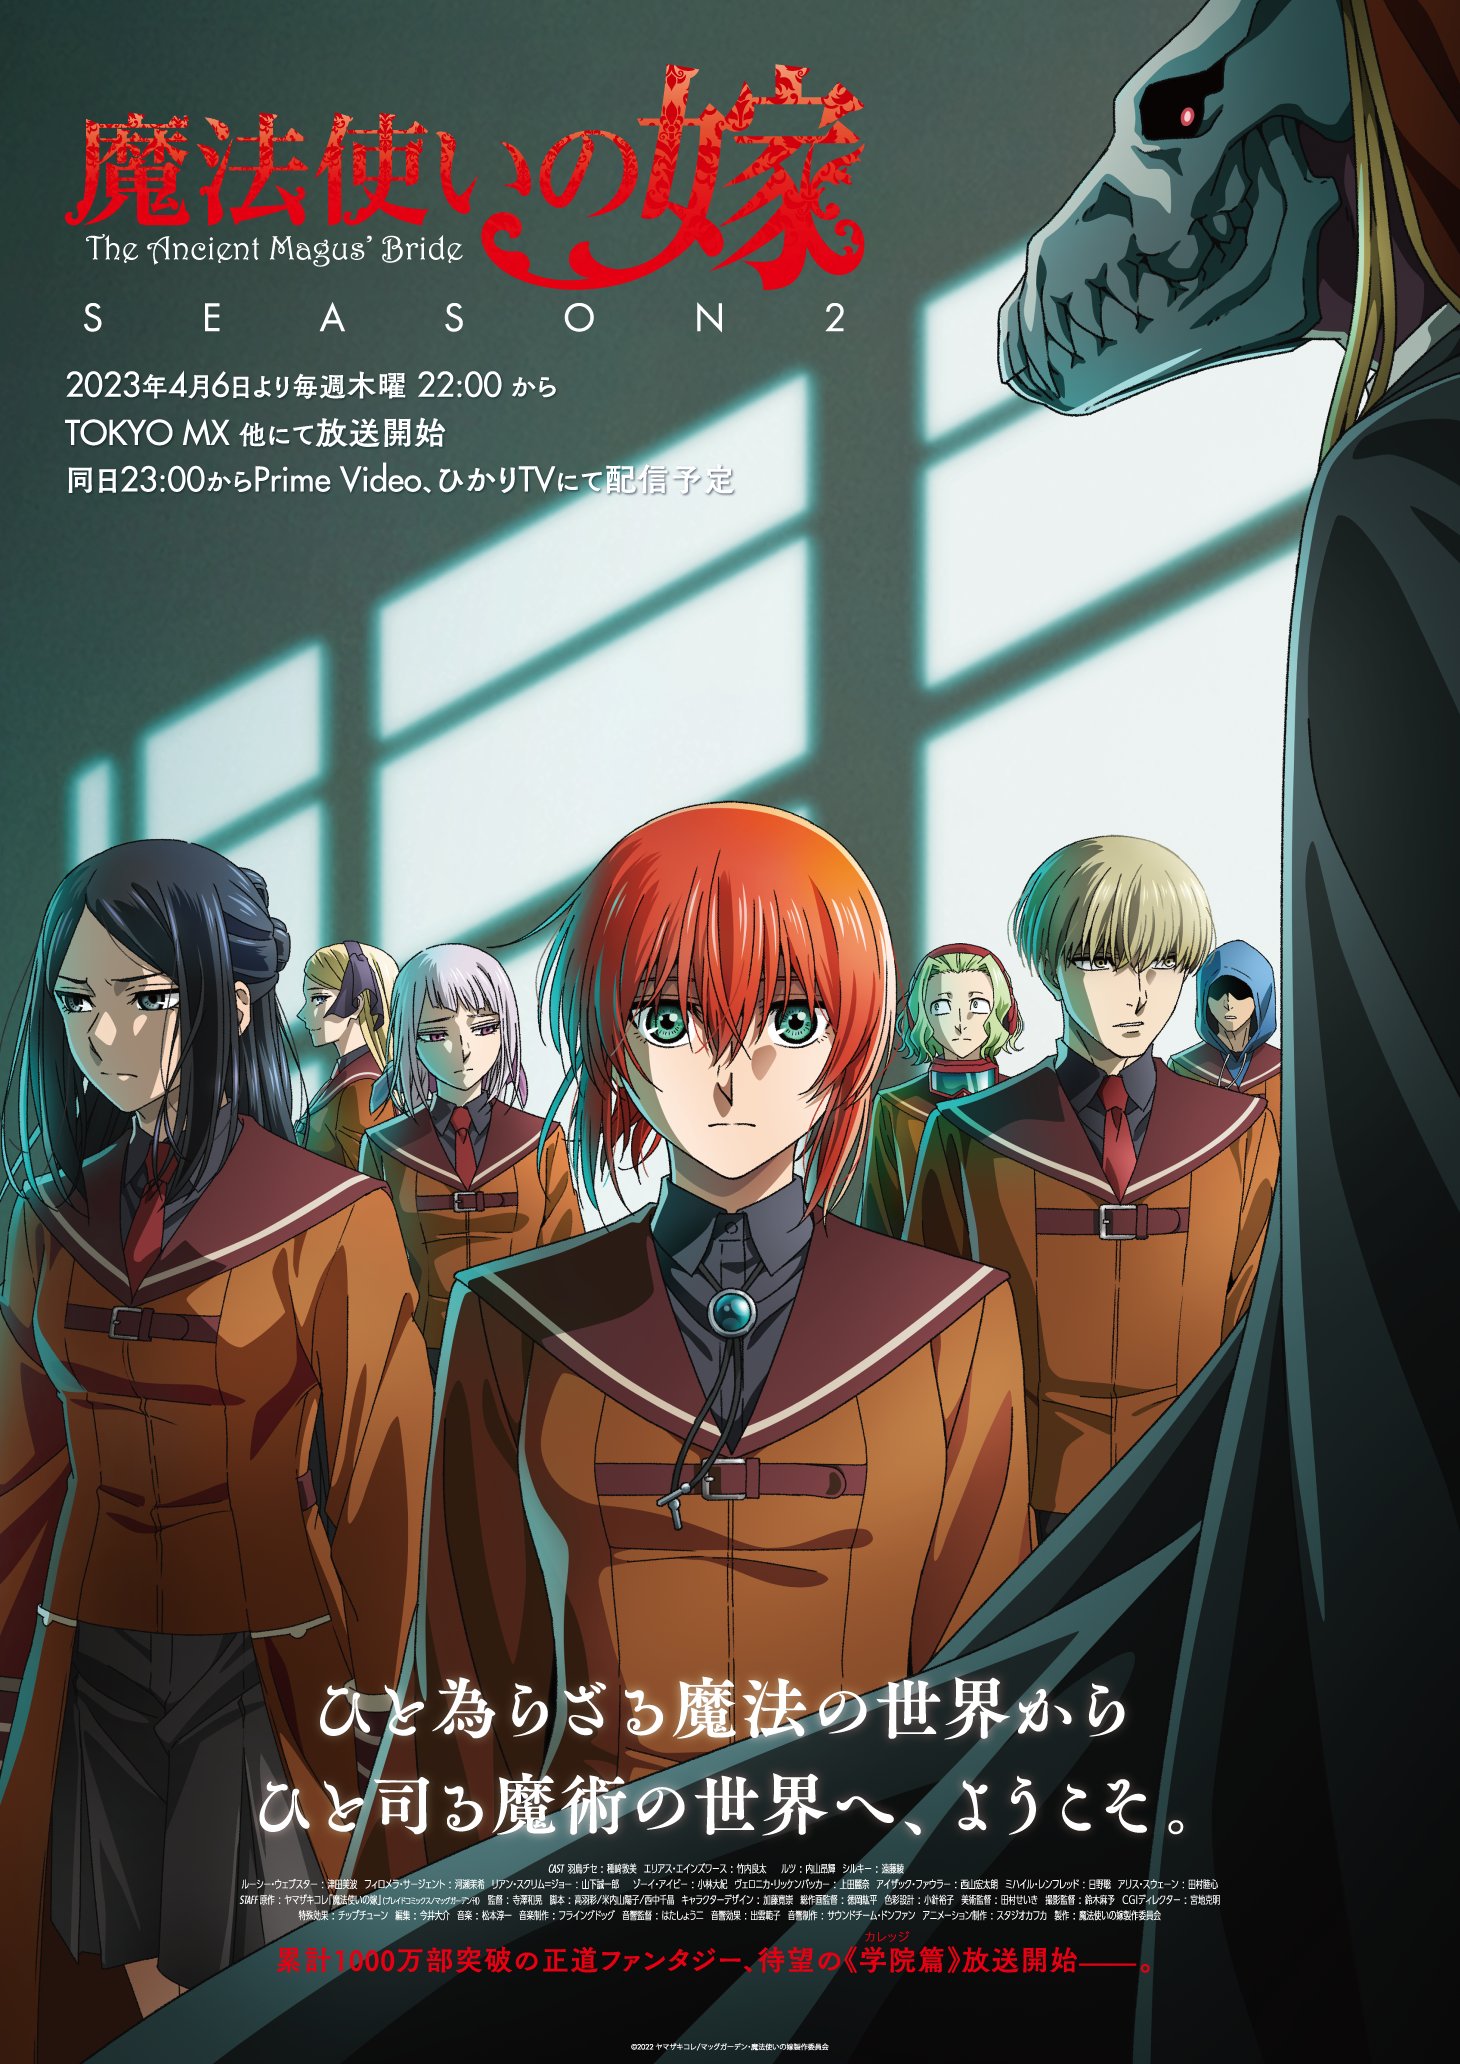 A new key visual for the upcoming second season of The Ancient Magus' Bride TV anime featuring artwork of protagonist Chise Hatori and her fellow students lingering in the hallway of their magical university while dressed in their school uniforms while Elias Ainsworth looms in the foreground.